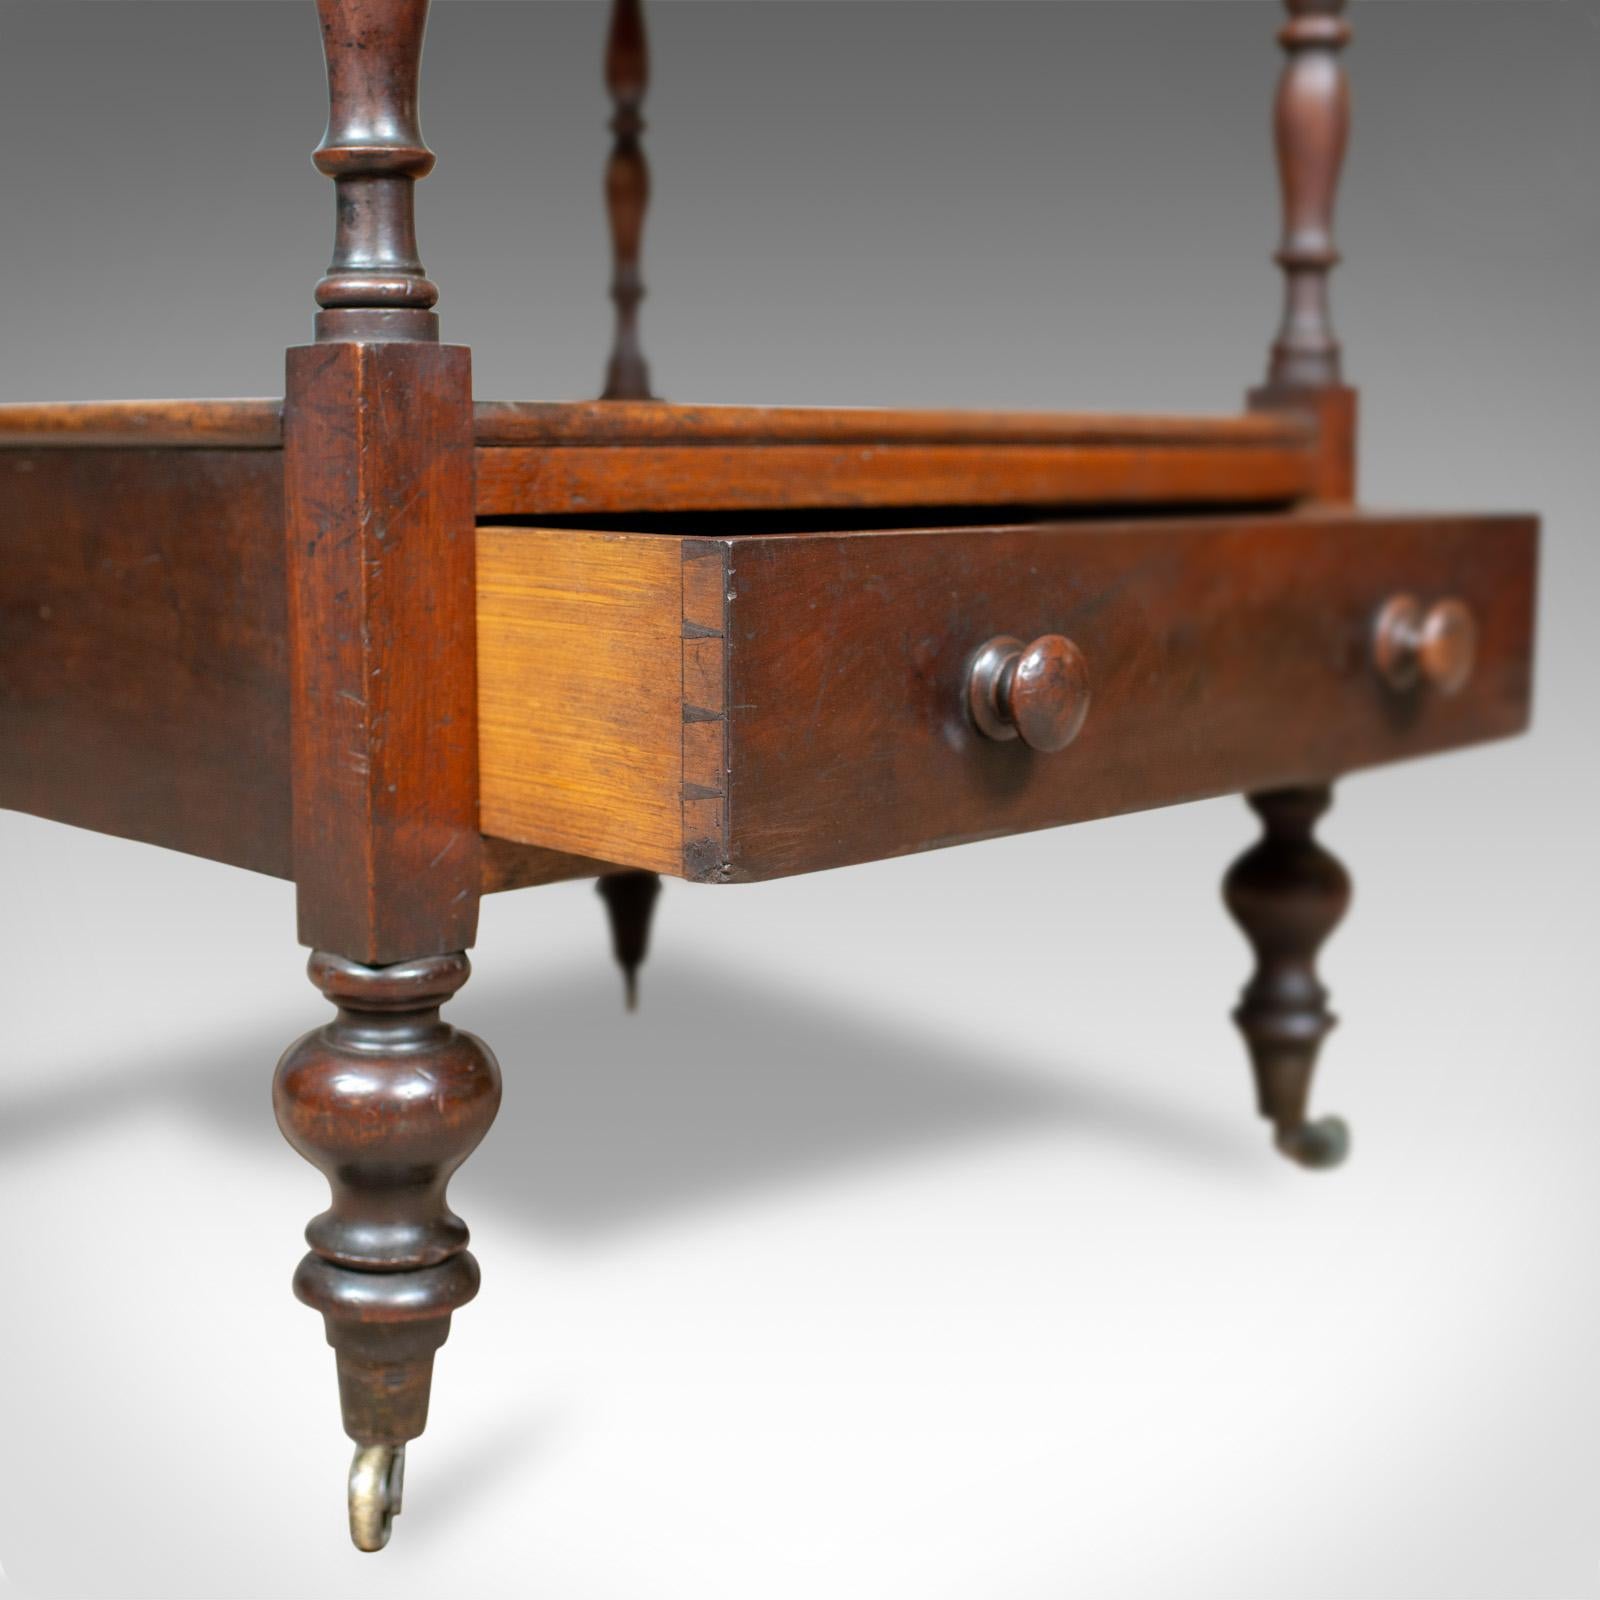 Antique Whatnot, English, Mahogany, Four-Tier, Regency, Display Stand circa 1820 3